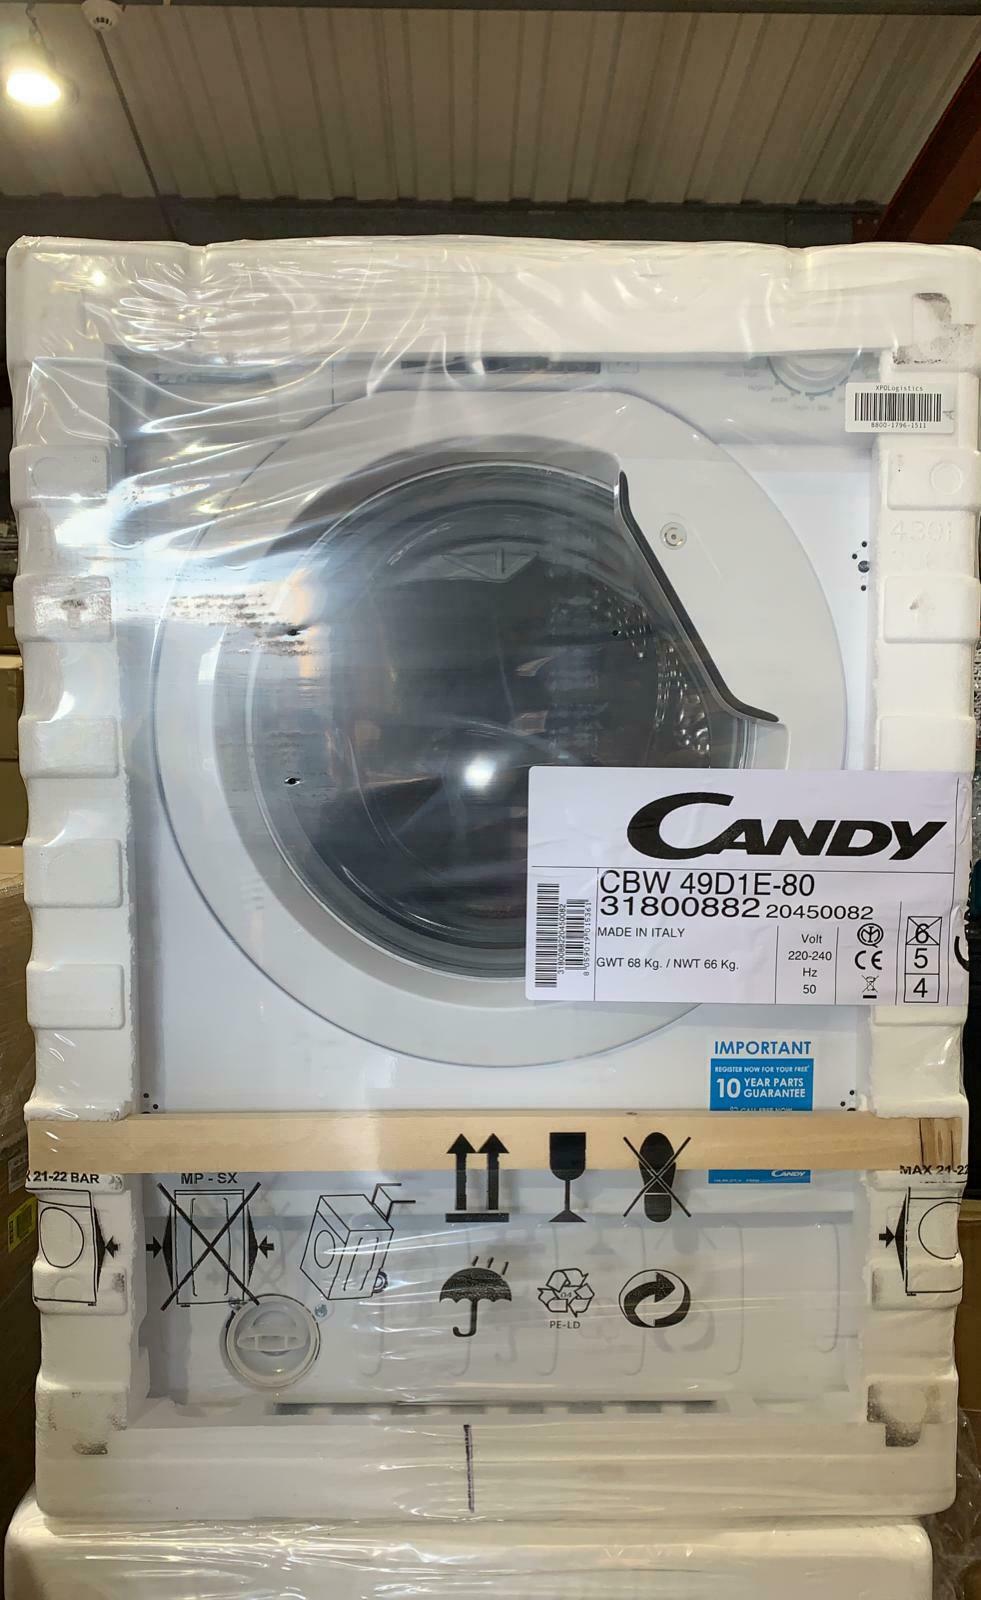 Candy CBW 49D1XE 80 White Built-in Washing machine- 9kg-1511-1521-1514-New